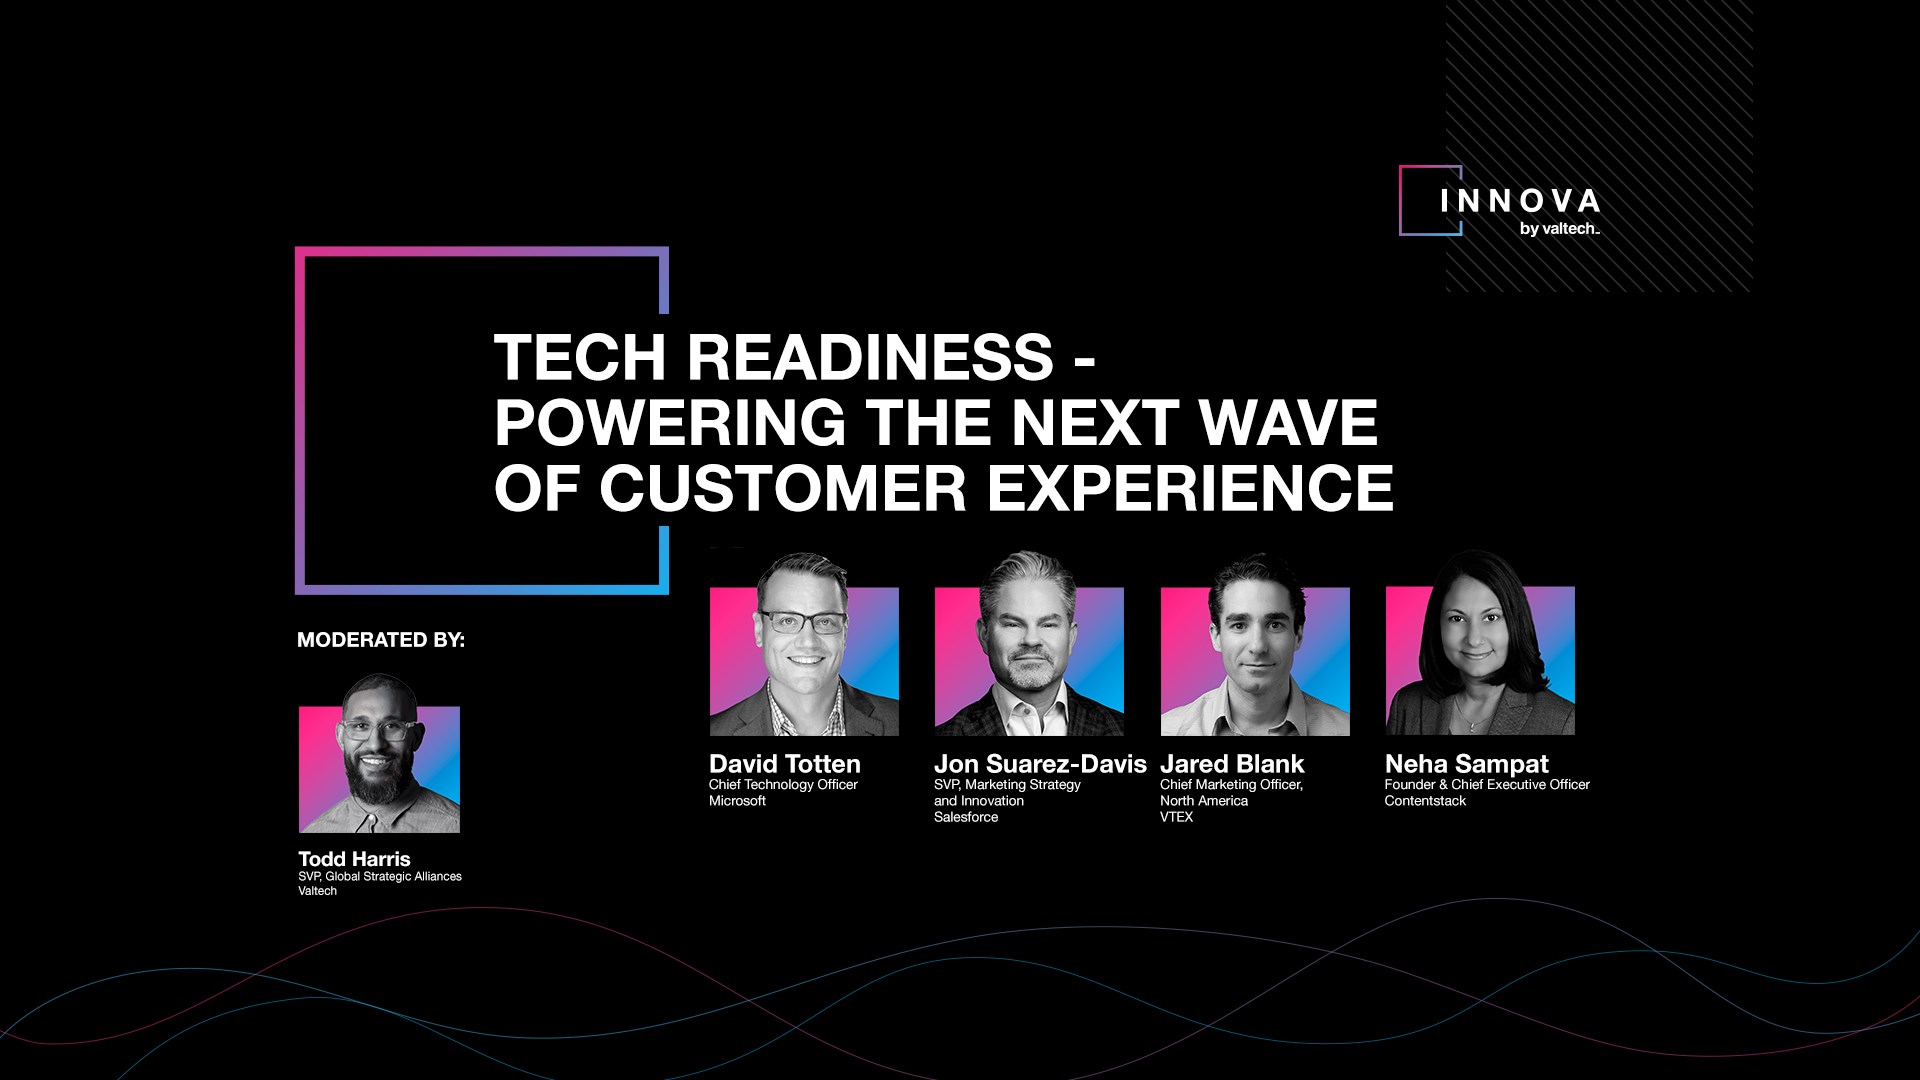 Powering the next wave of customer experience